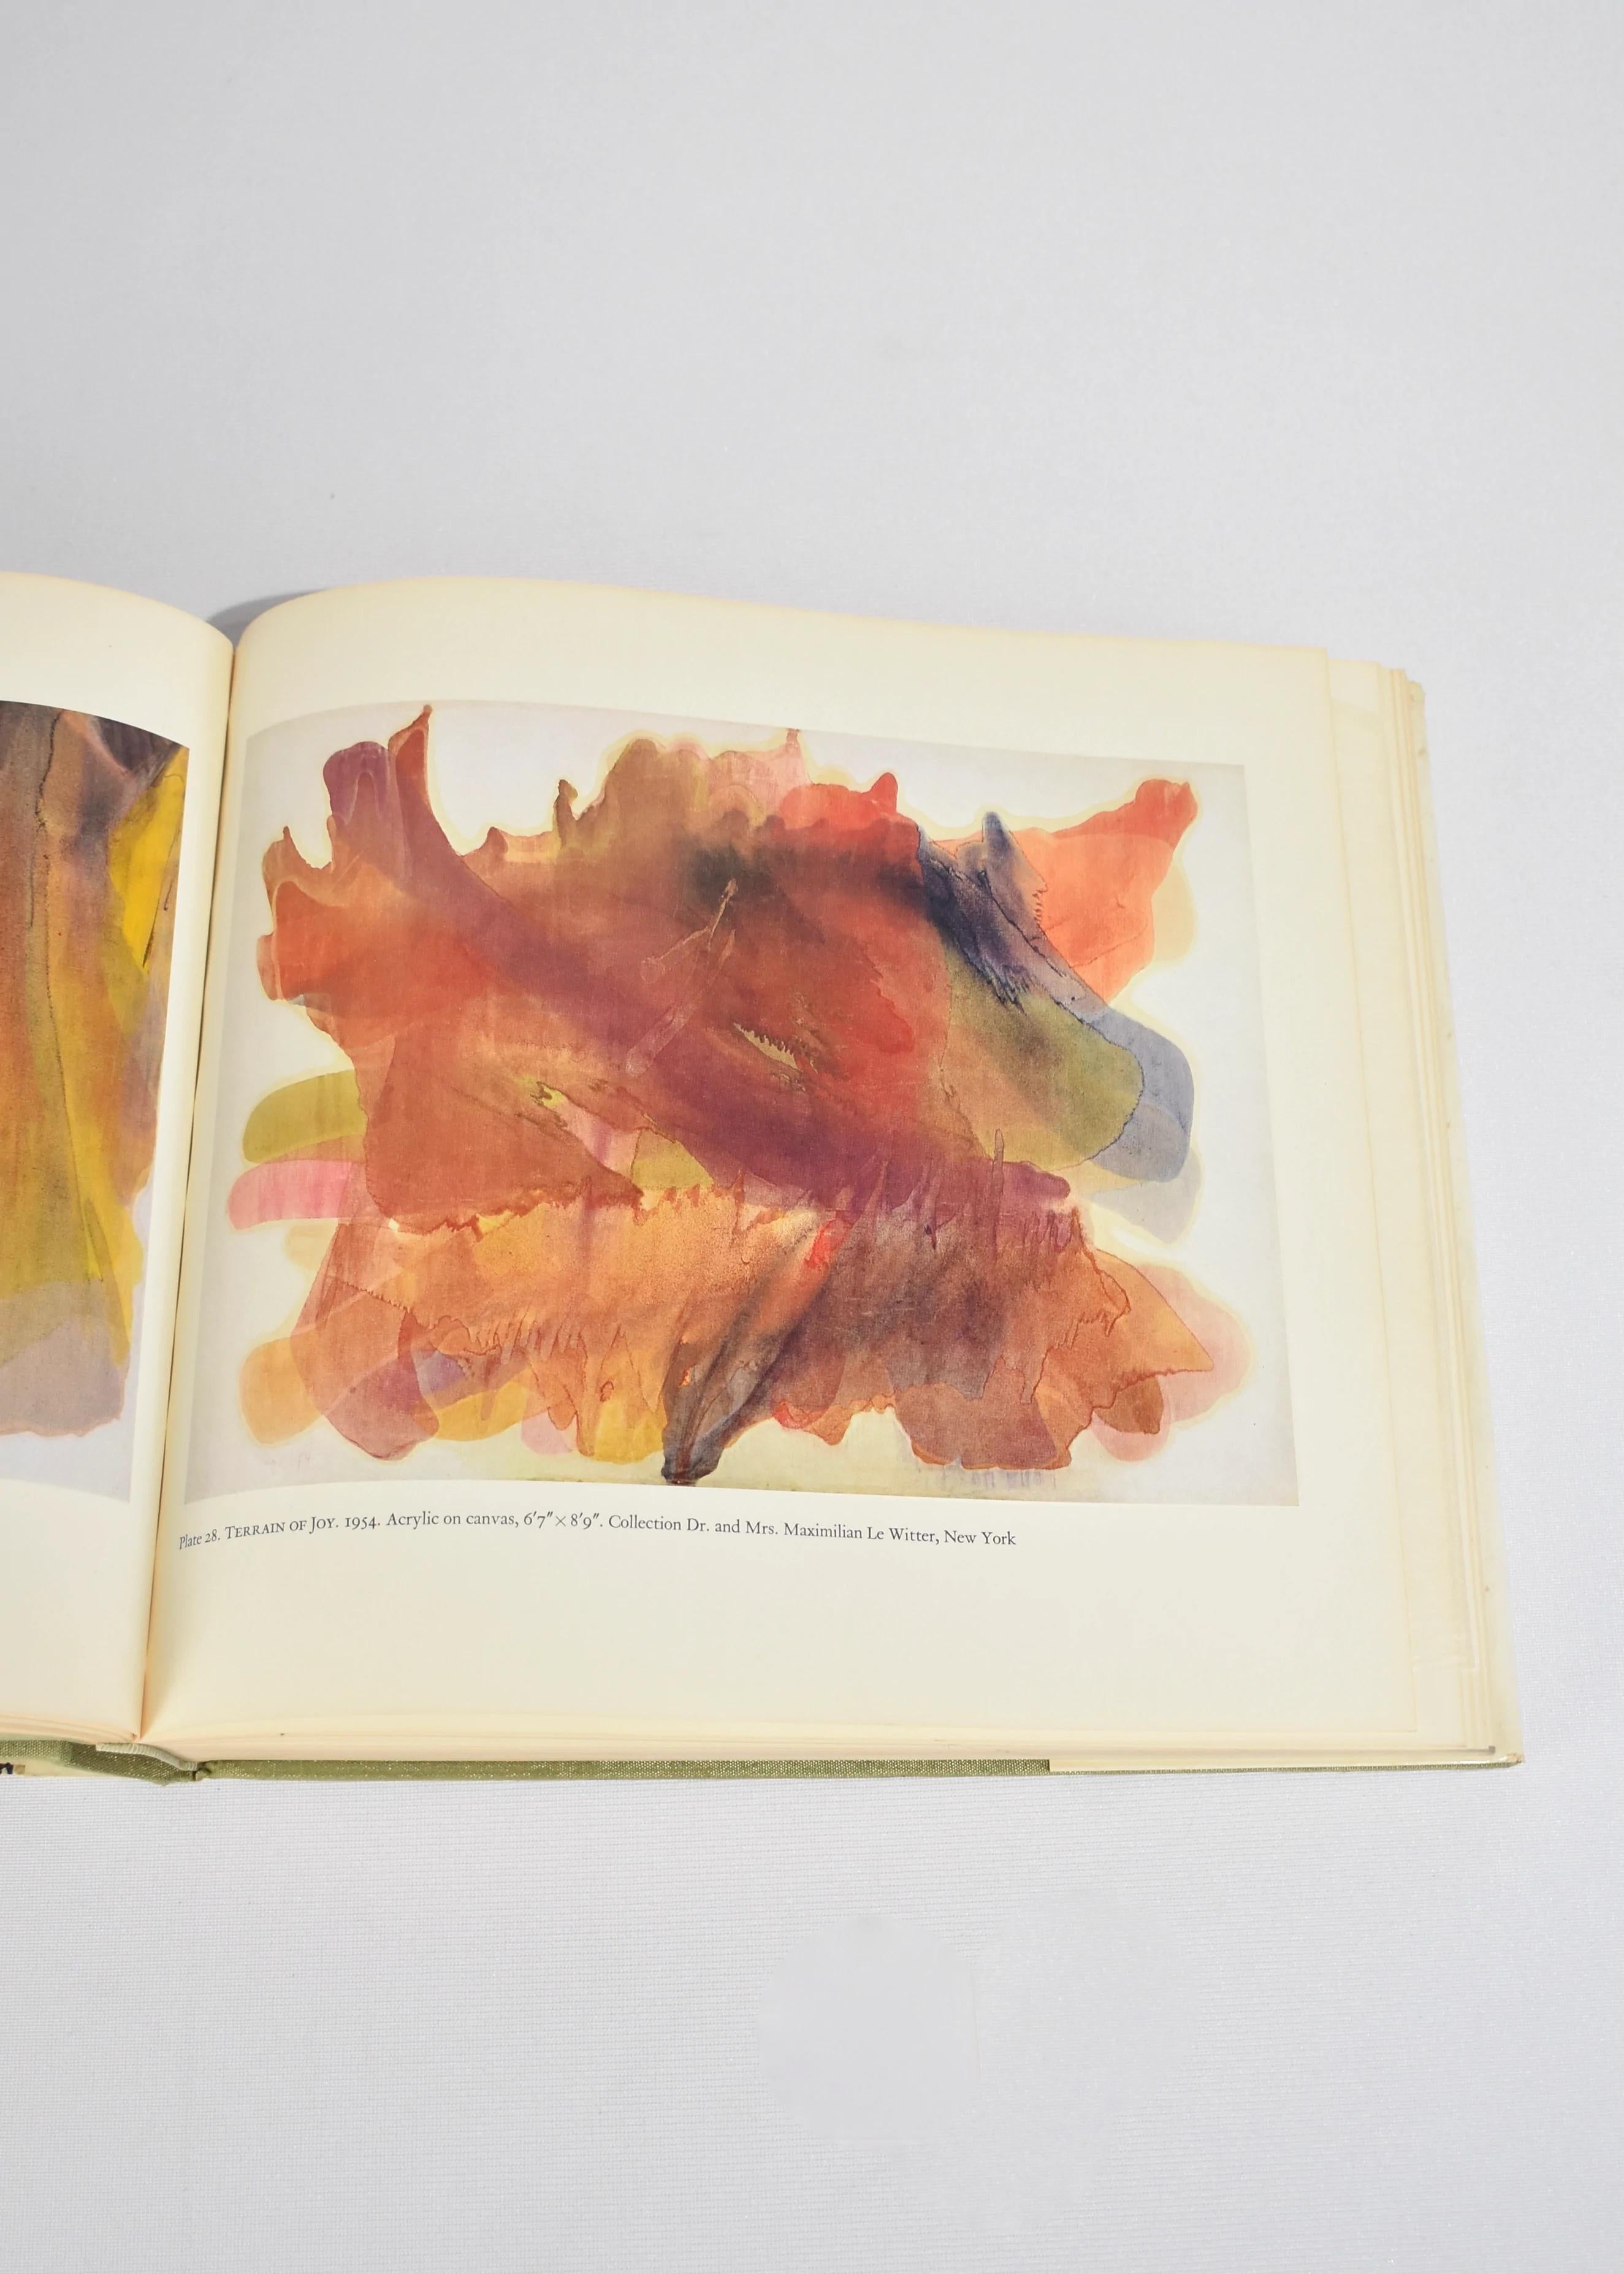 Vintage hardback coffee table book featuring the work of artist, Morris Louis. Text by Michael Fried, published in 1970. First edition, 220 pages.

